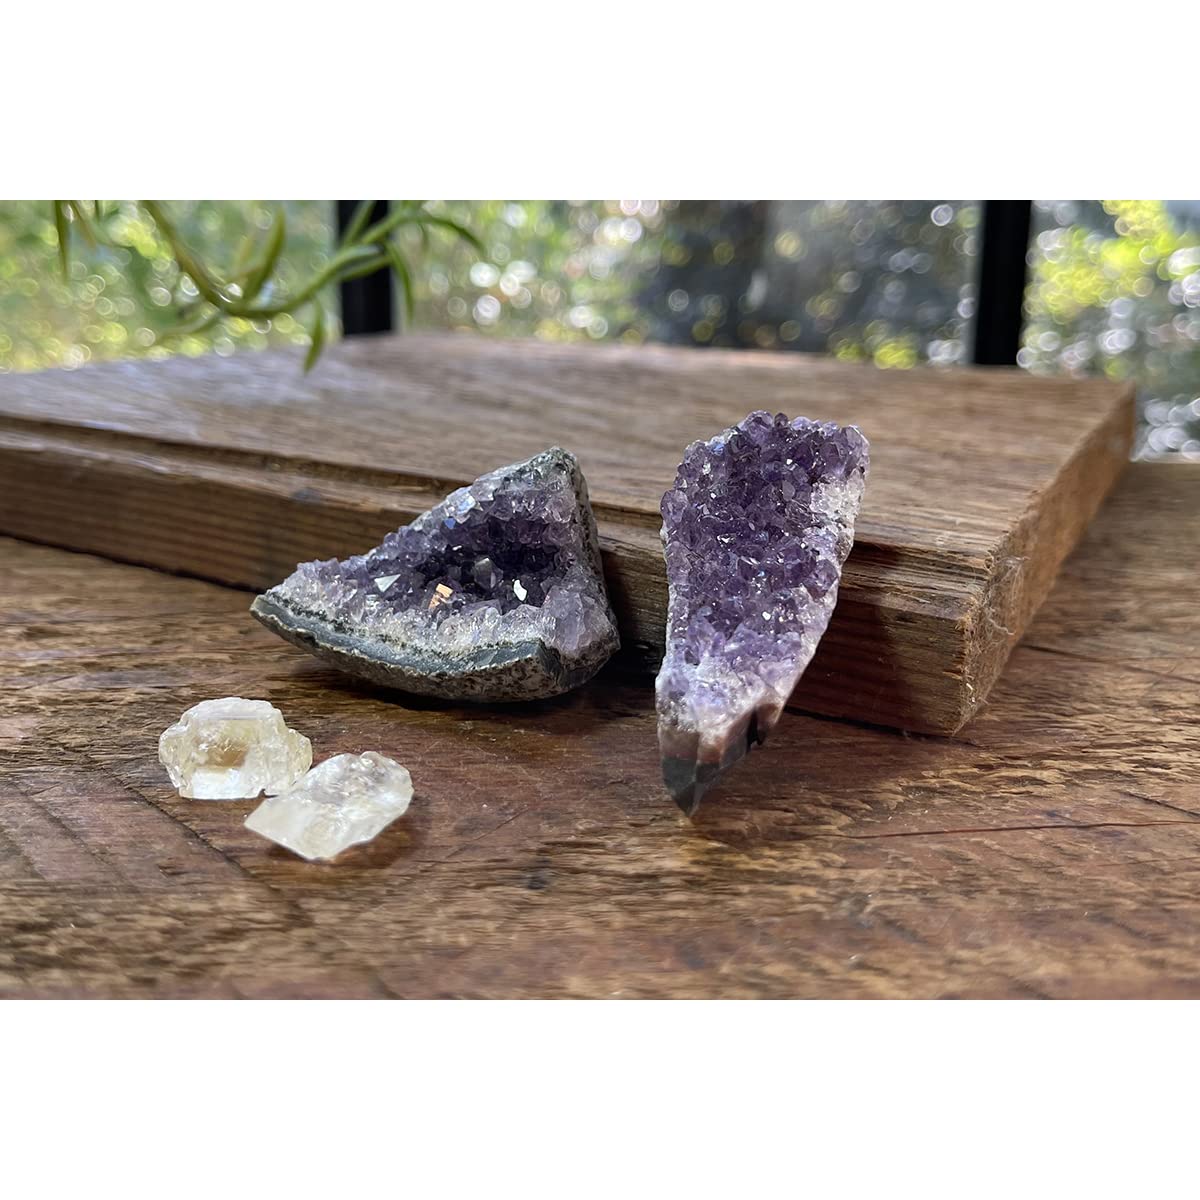 Crystal of the Month Subscription Box - Crystal Meditation - Crystal Decorations - Crystal Gifts - Crystal Collectors - Healing Crystals